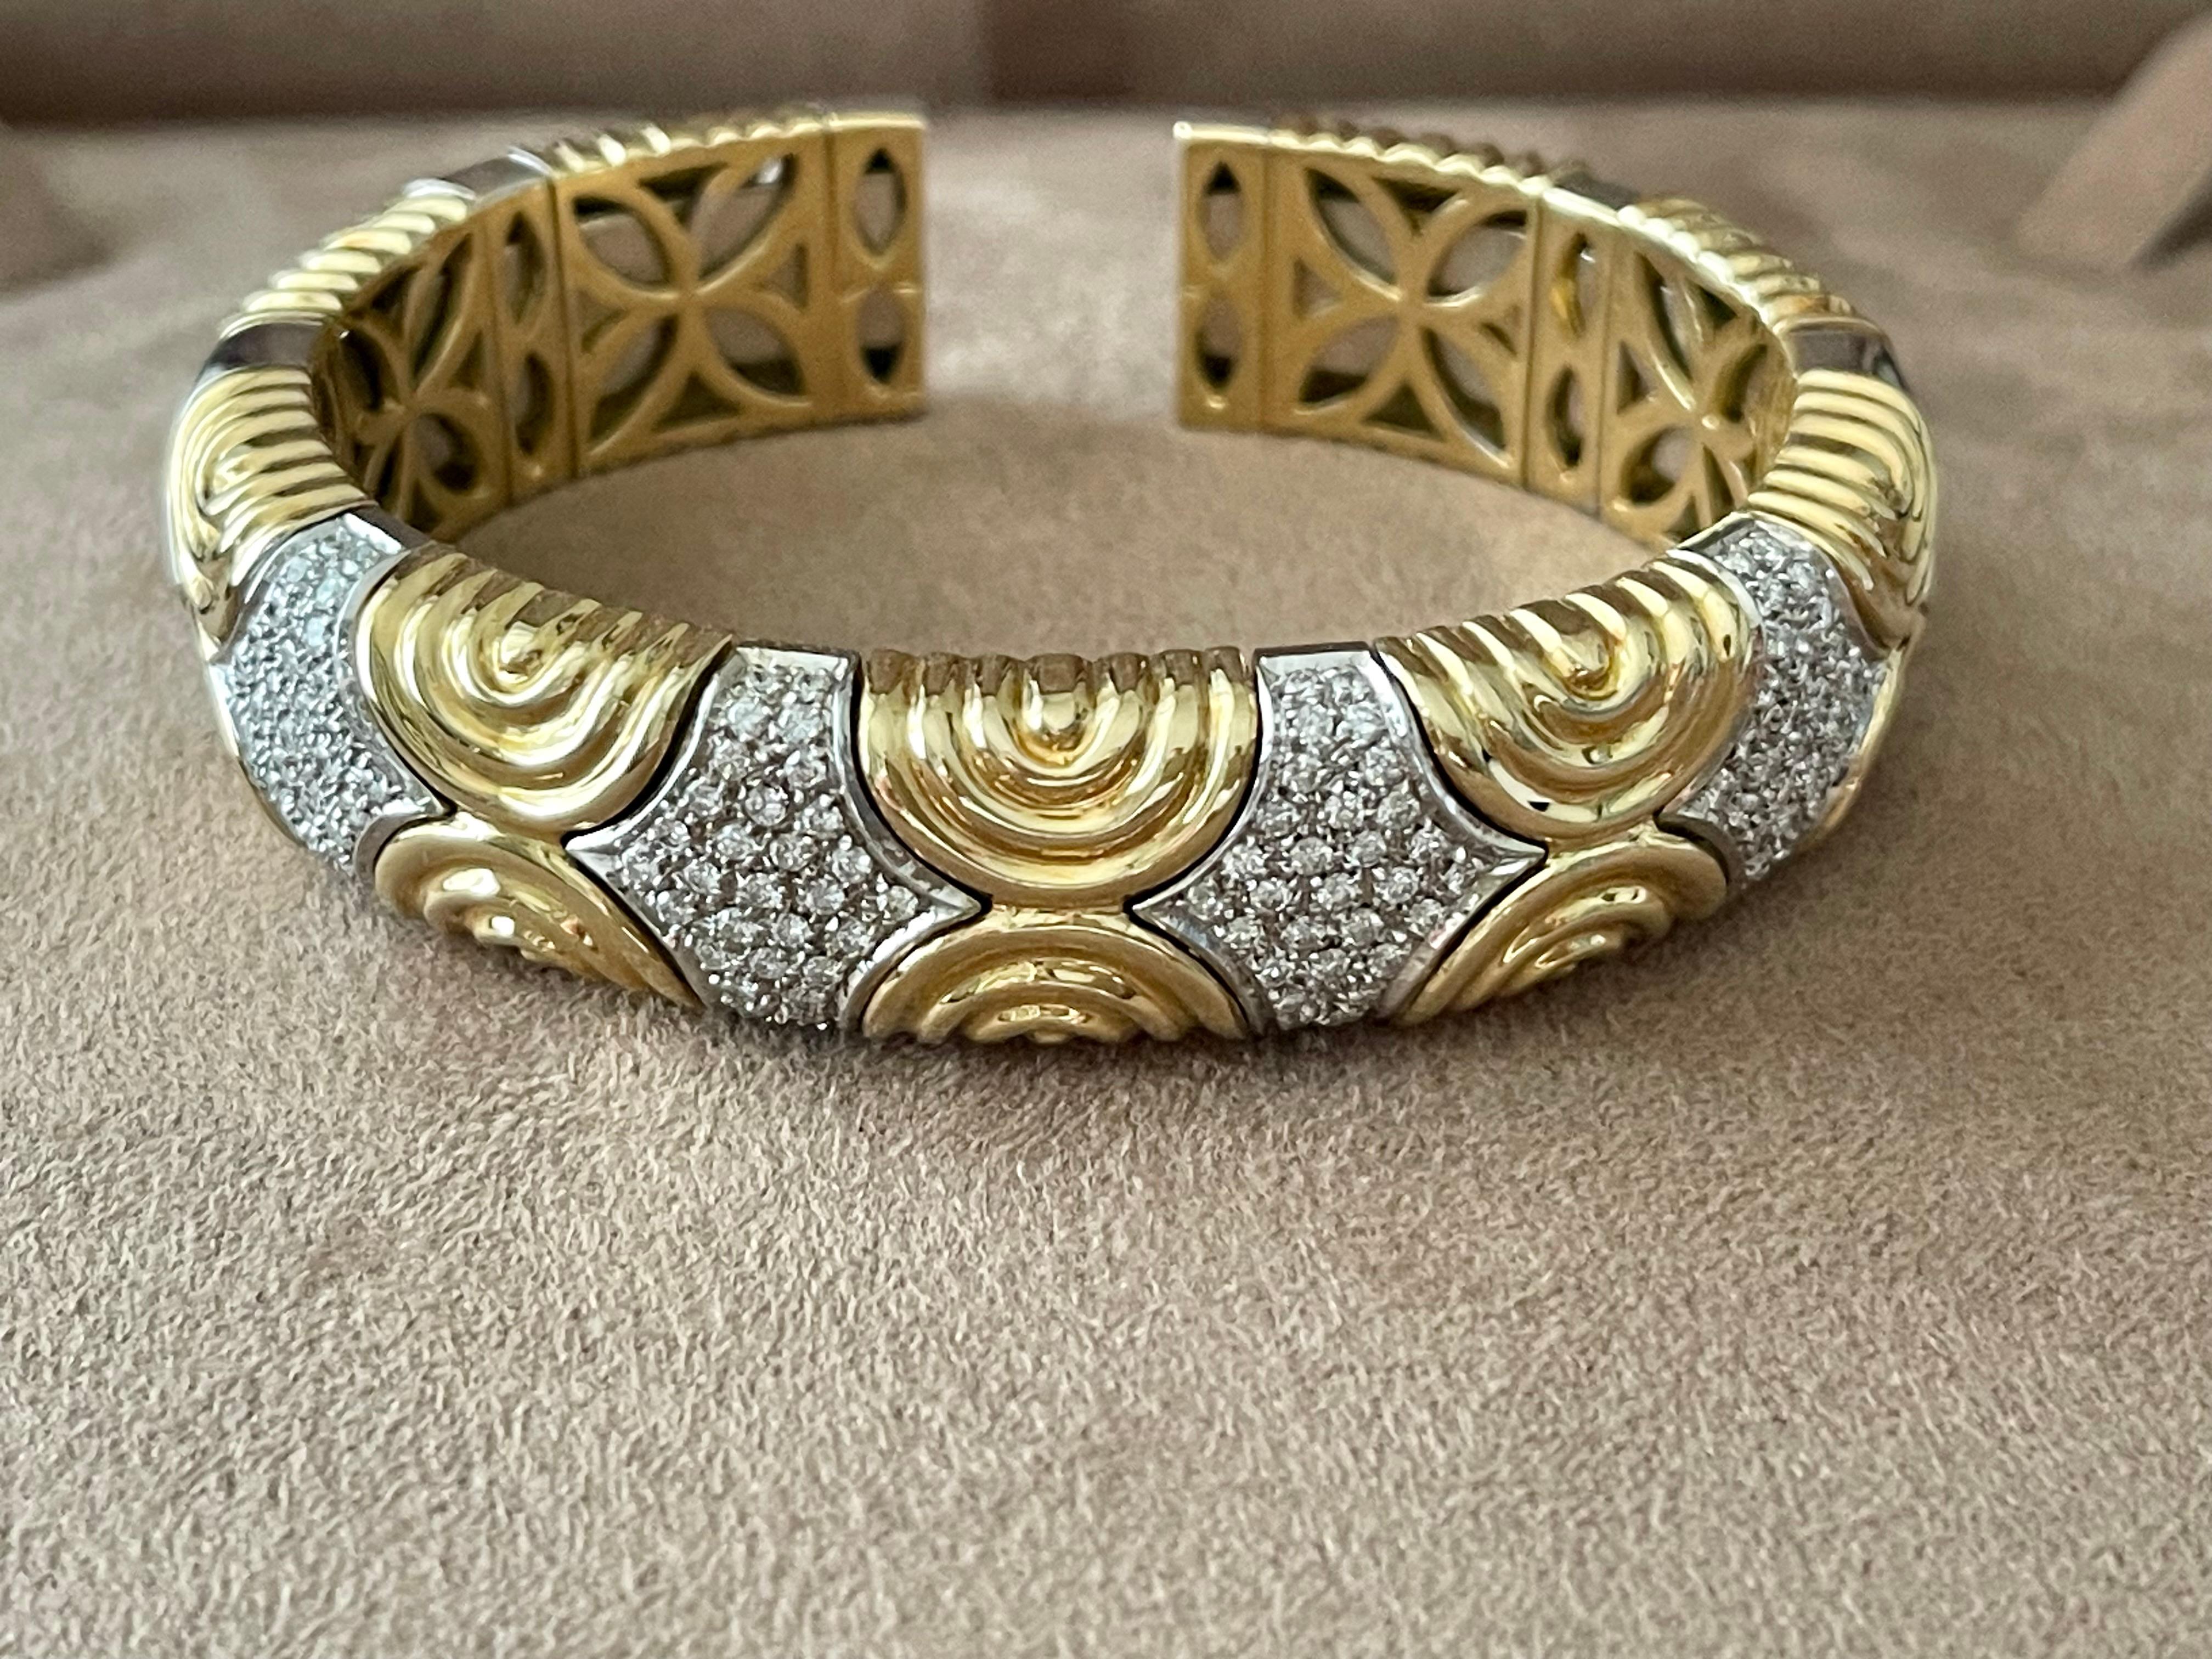 A timeless and very elegant italian 18 K yellow and white Gold Bangle bracelet pave set with brilliant cut Diamonds weighing approximately 2.00 ct. An iconic italian made cuff bracelet composed of sculptued geometric links. The bangle is flexible